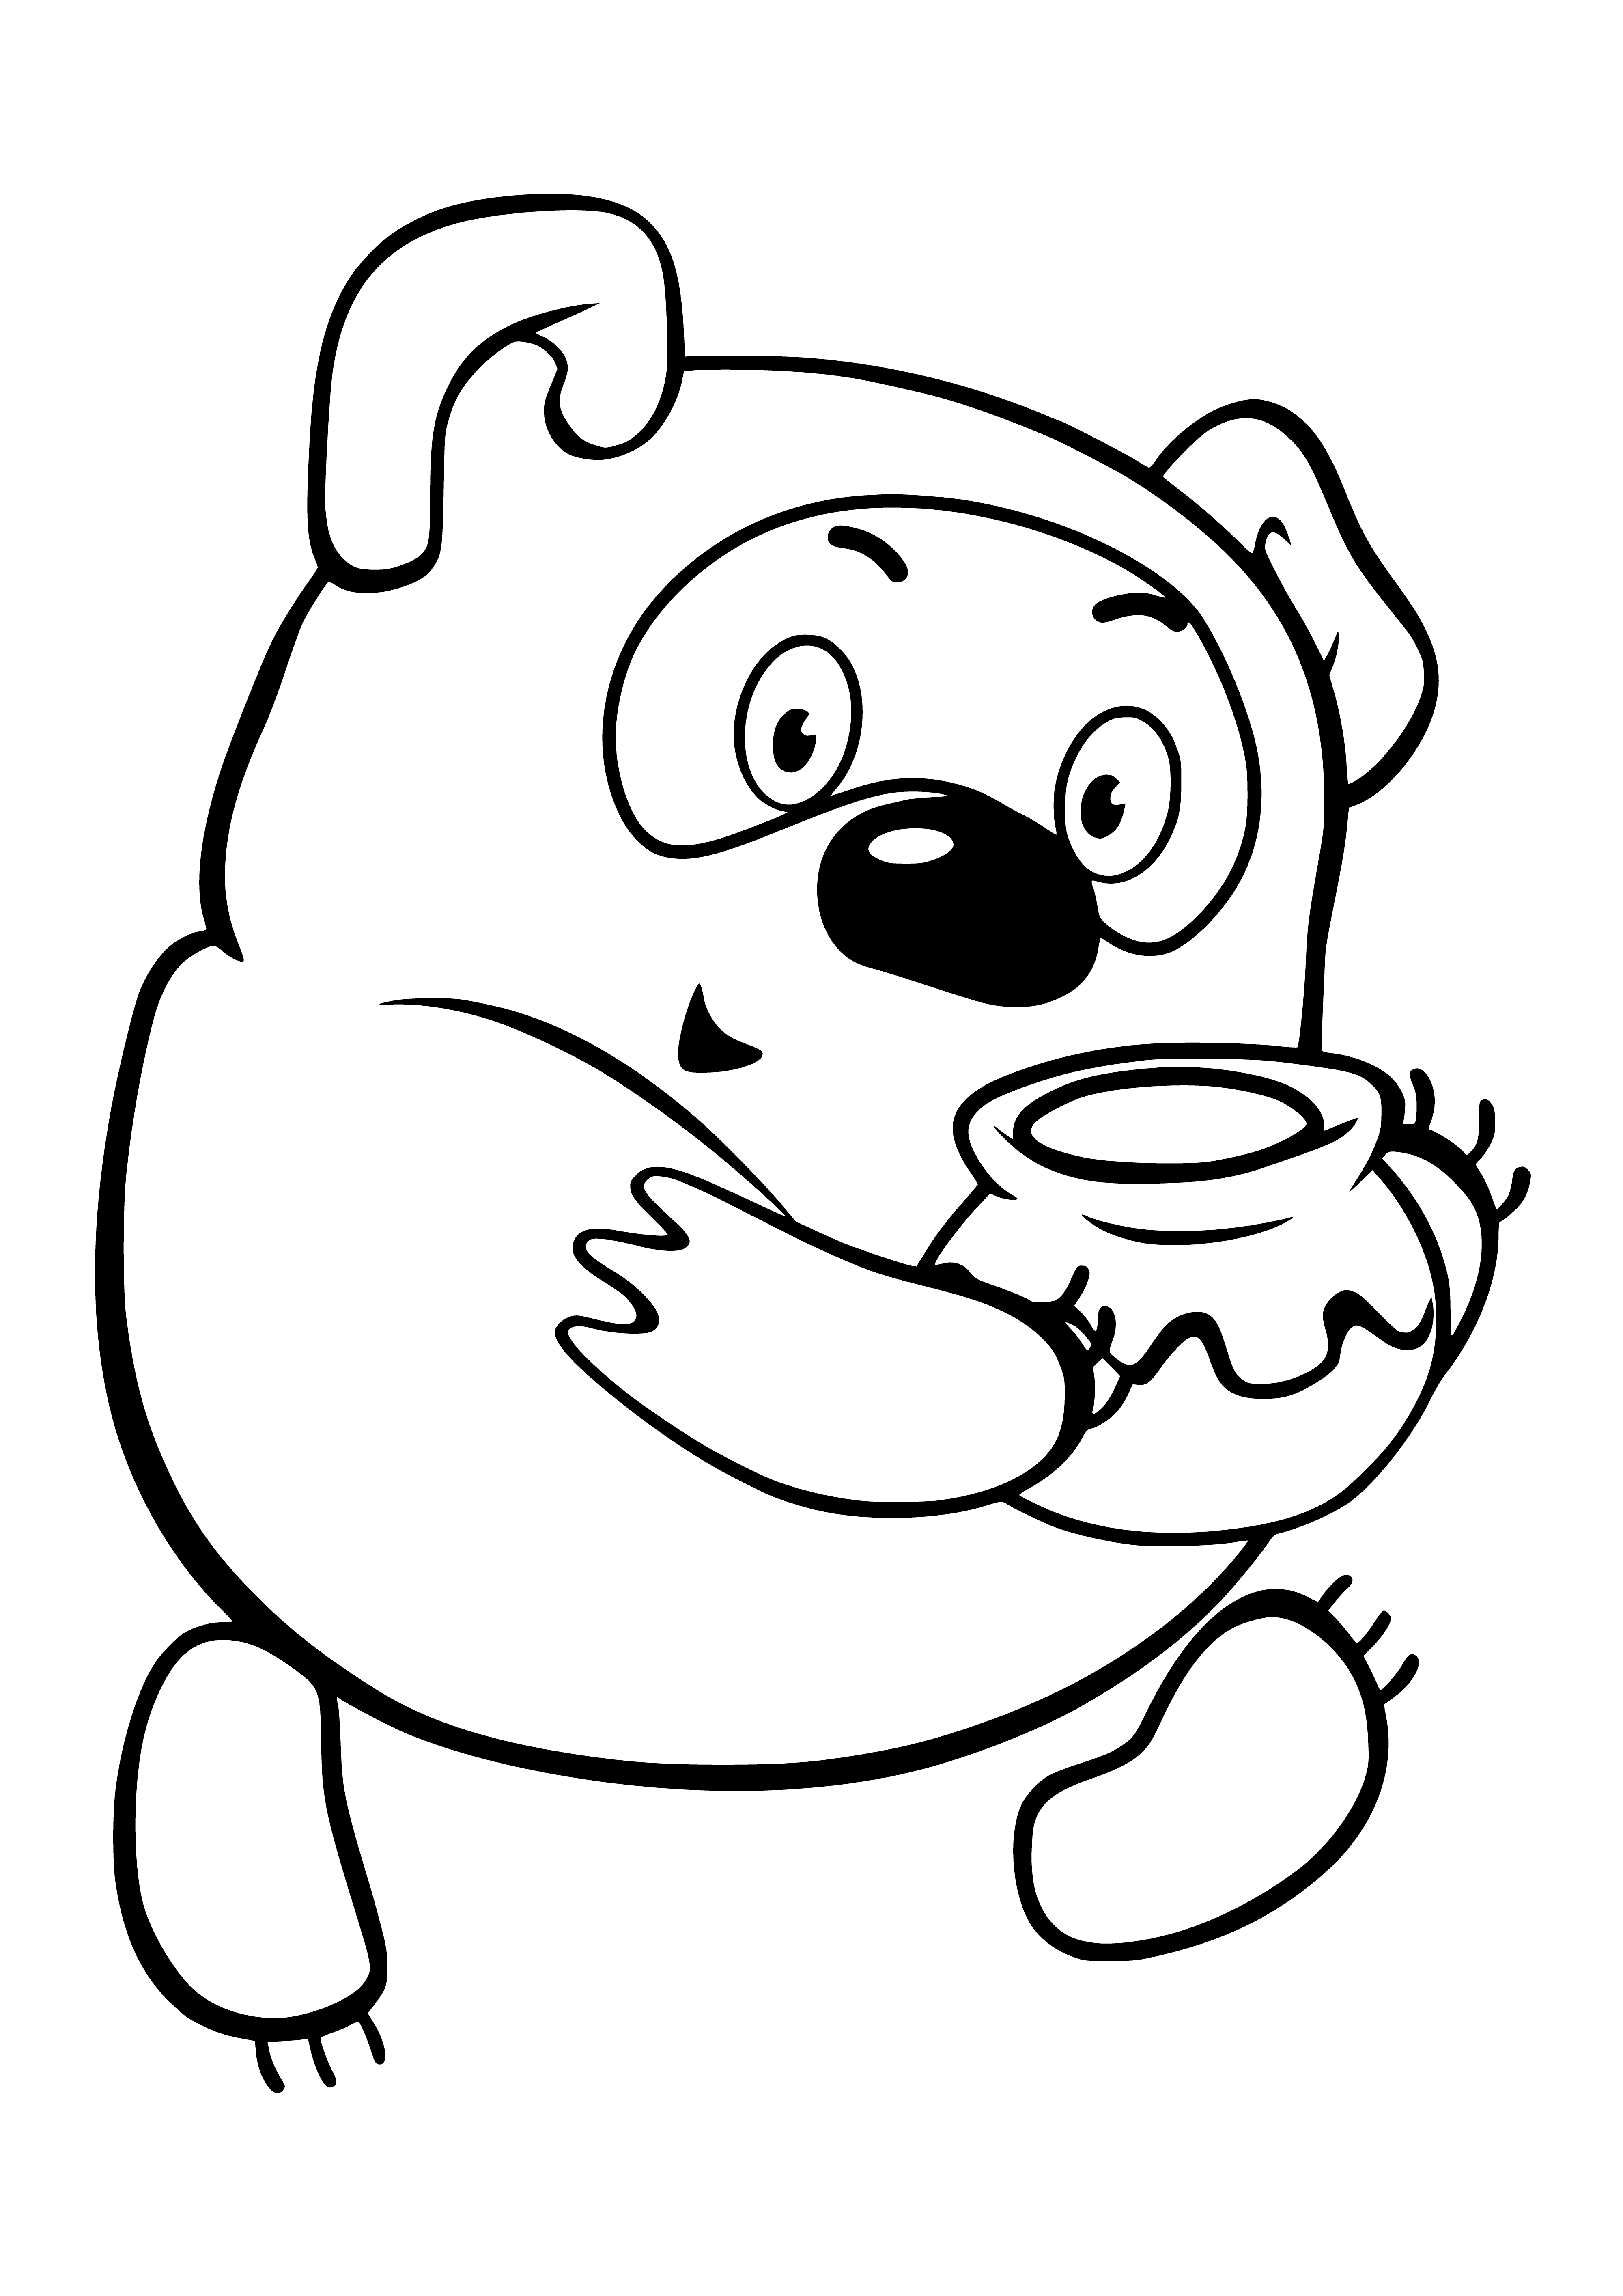 coloring page: Little bear sits in front of a tree eating honey from a pot. He wears a red shirt and blue jacket.